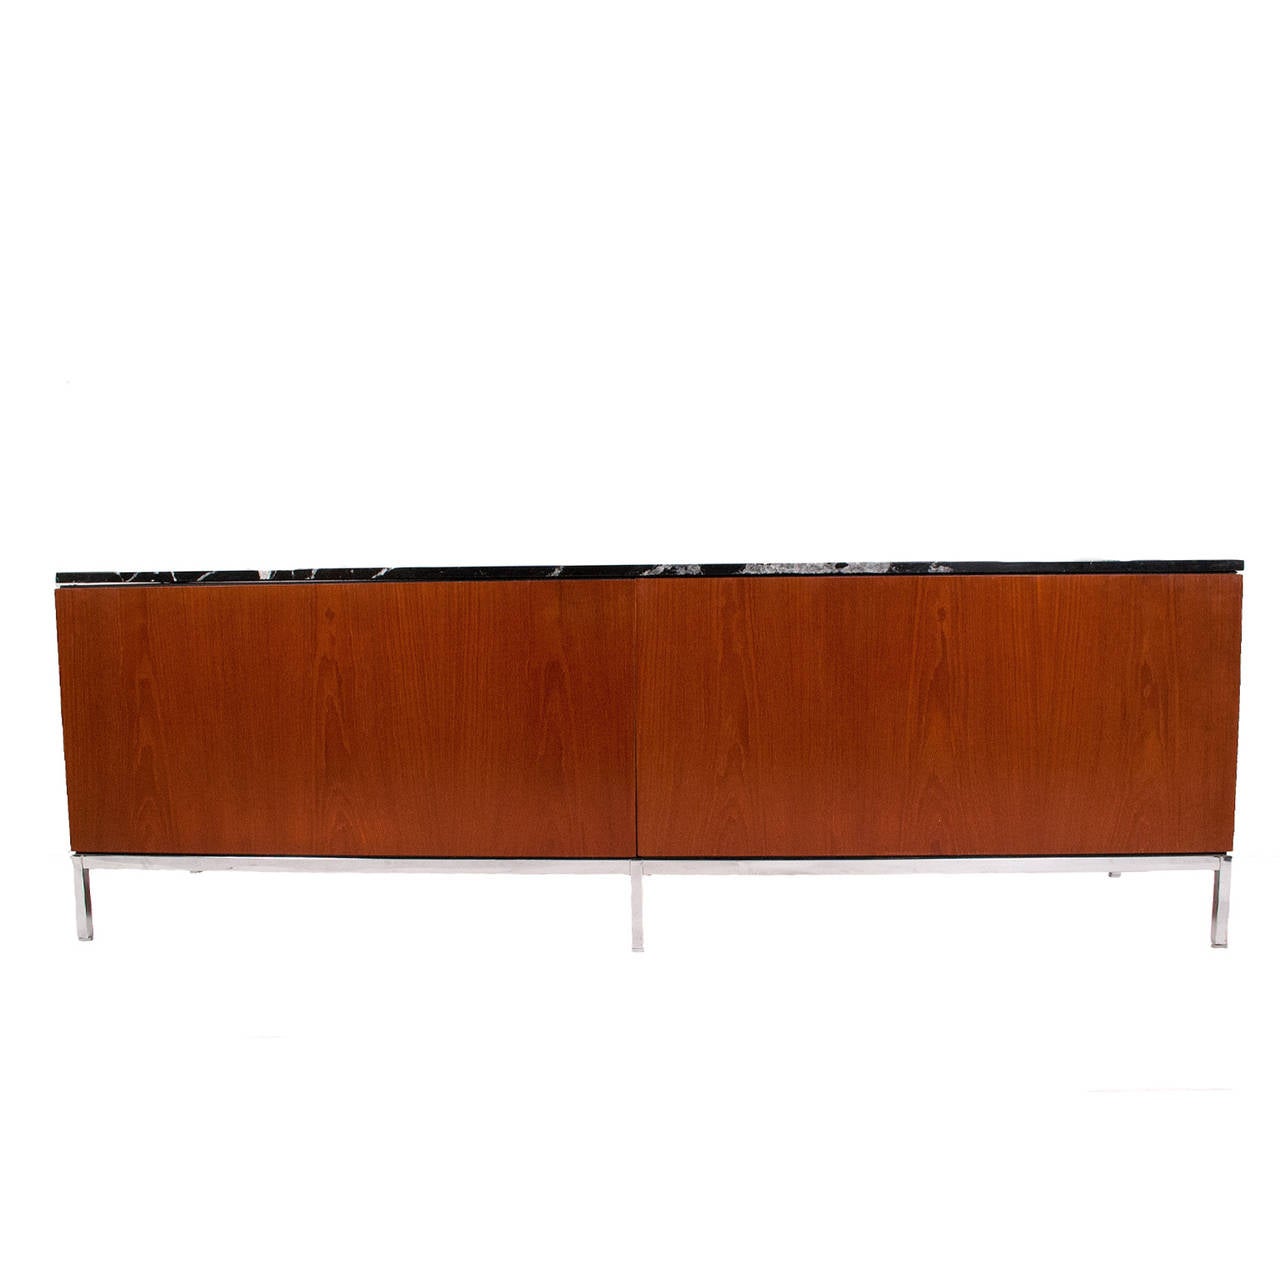 Teak freestanding credenza (chest of drawers) with black marble, design in 1961.